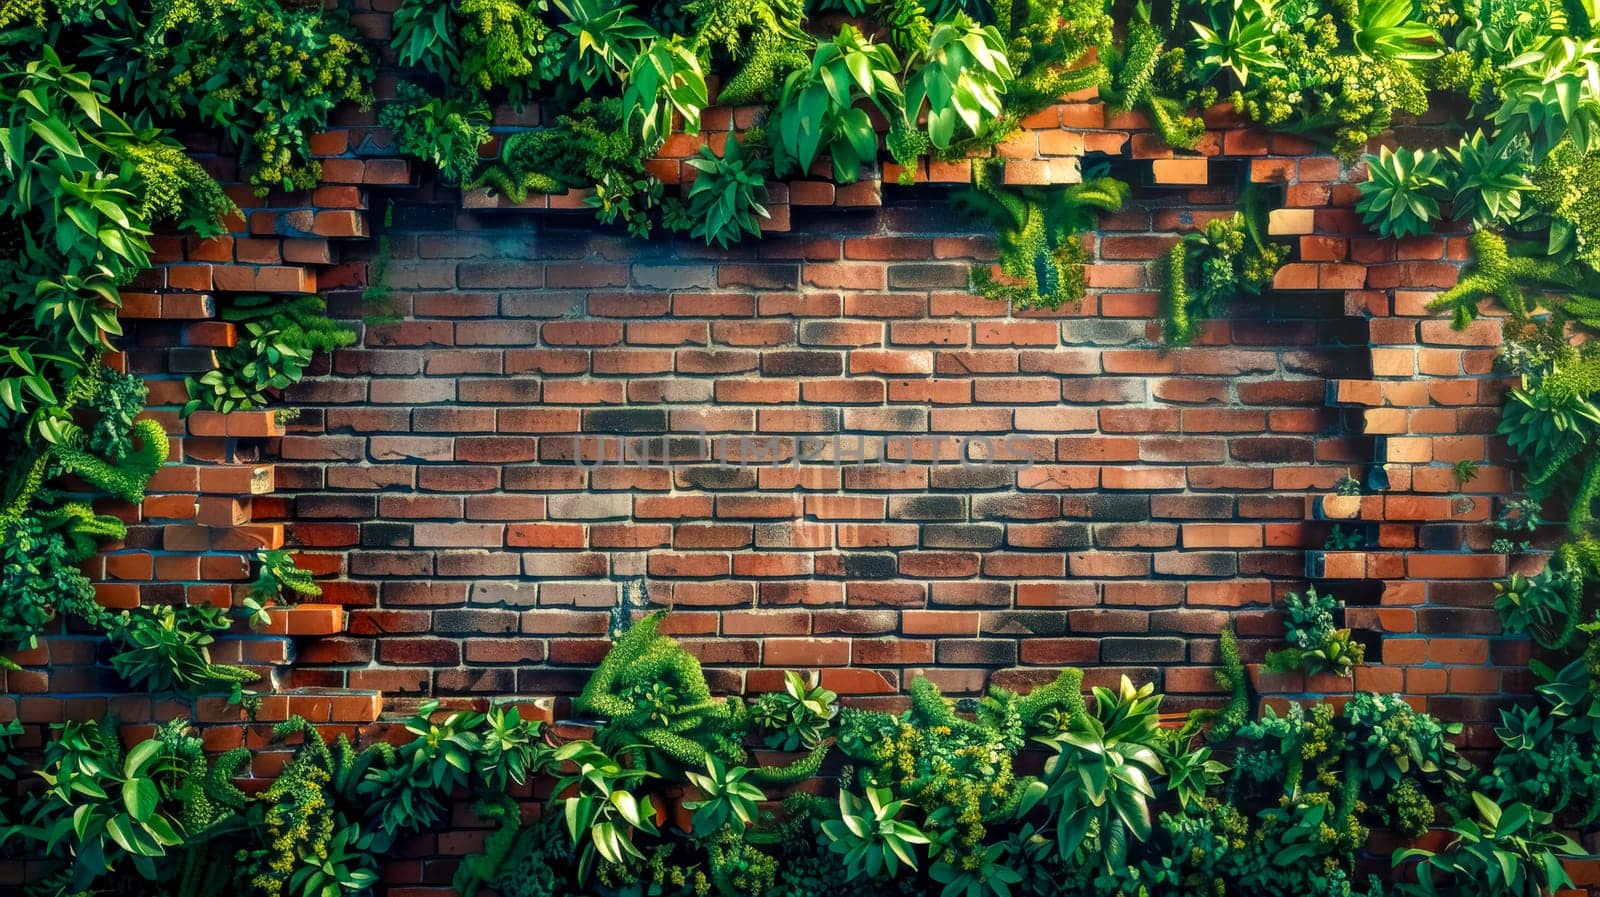 Lush foliage intertwines with a rustic red brick wall, creating a natural urban tapestry